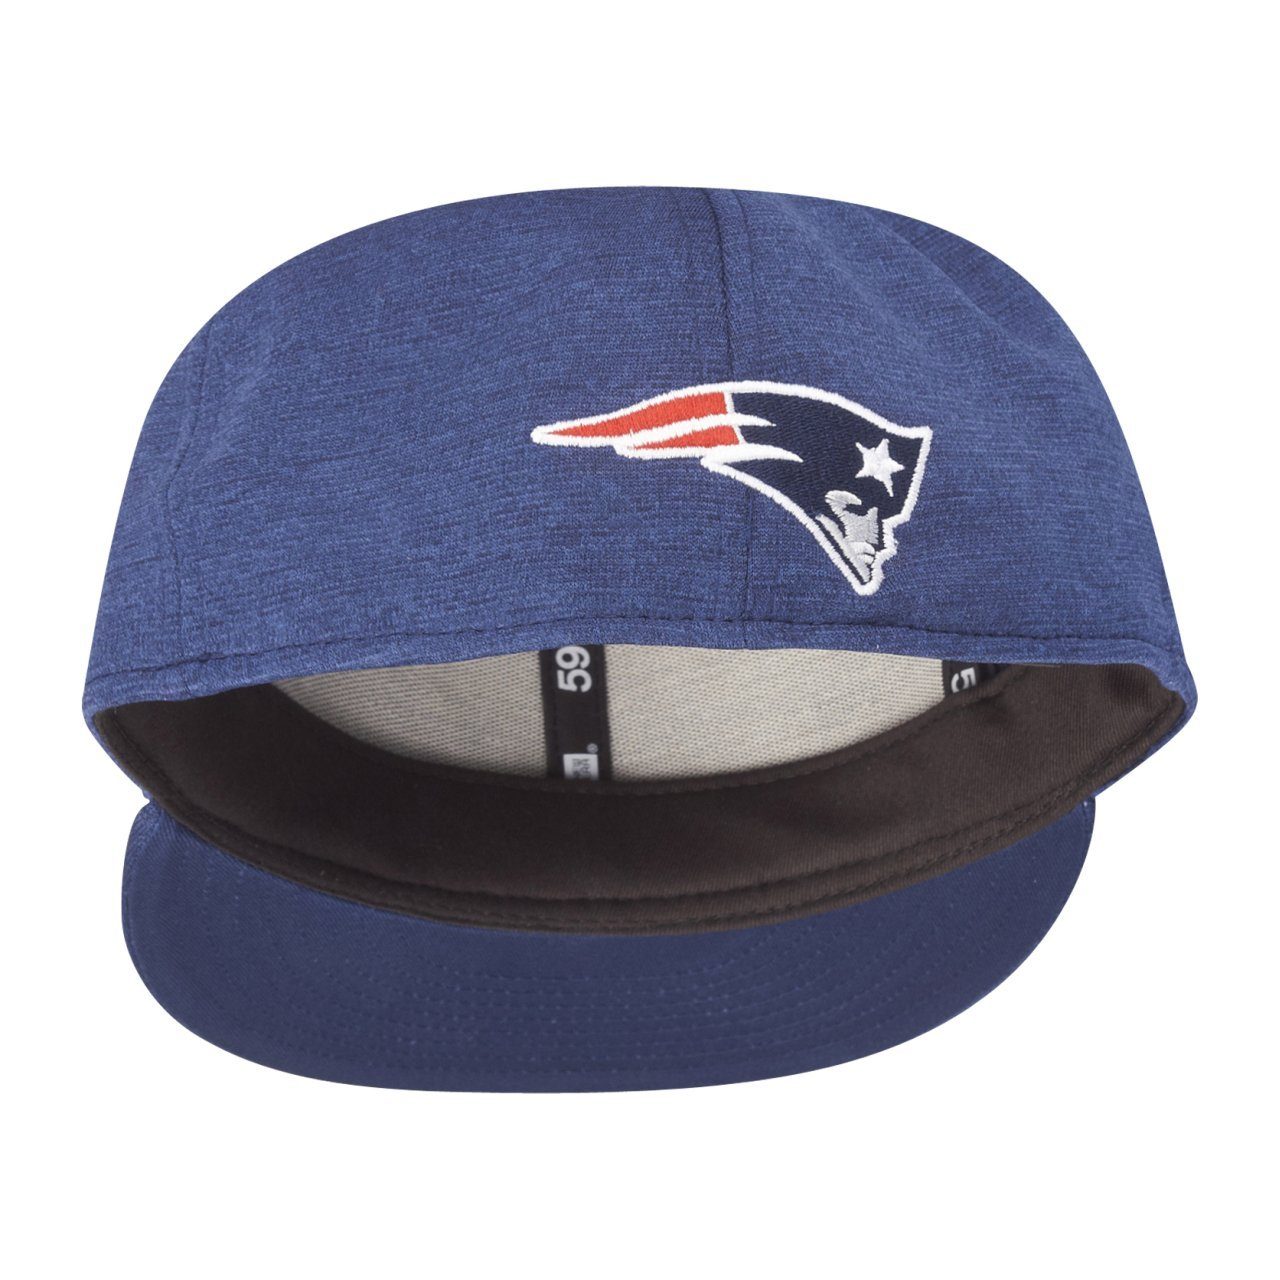 New Era Fitted Cap SHADOW New TECH England 59Fifty Patriots